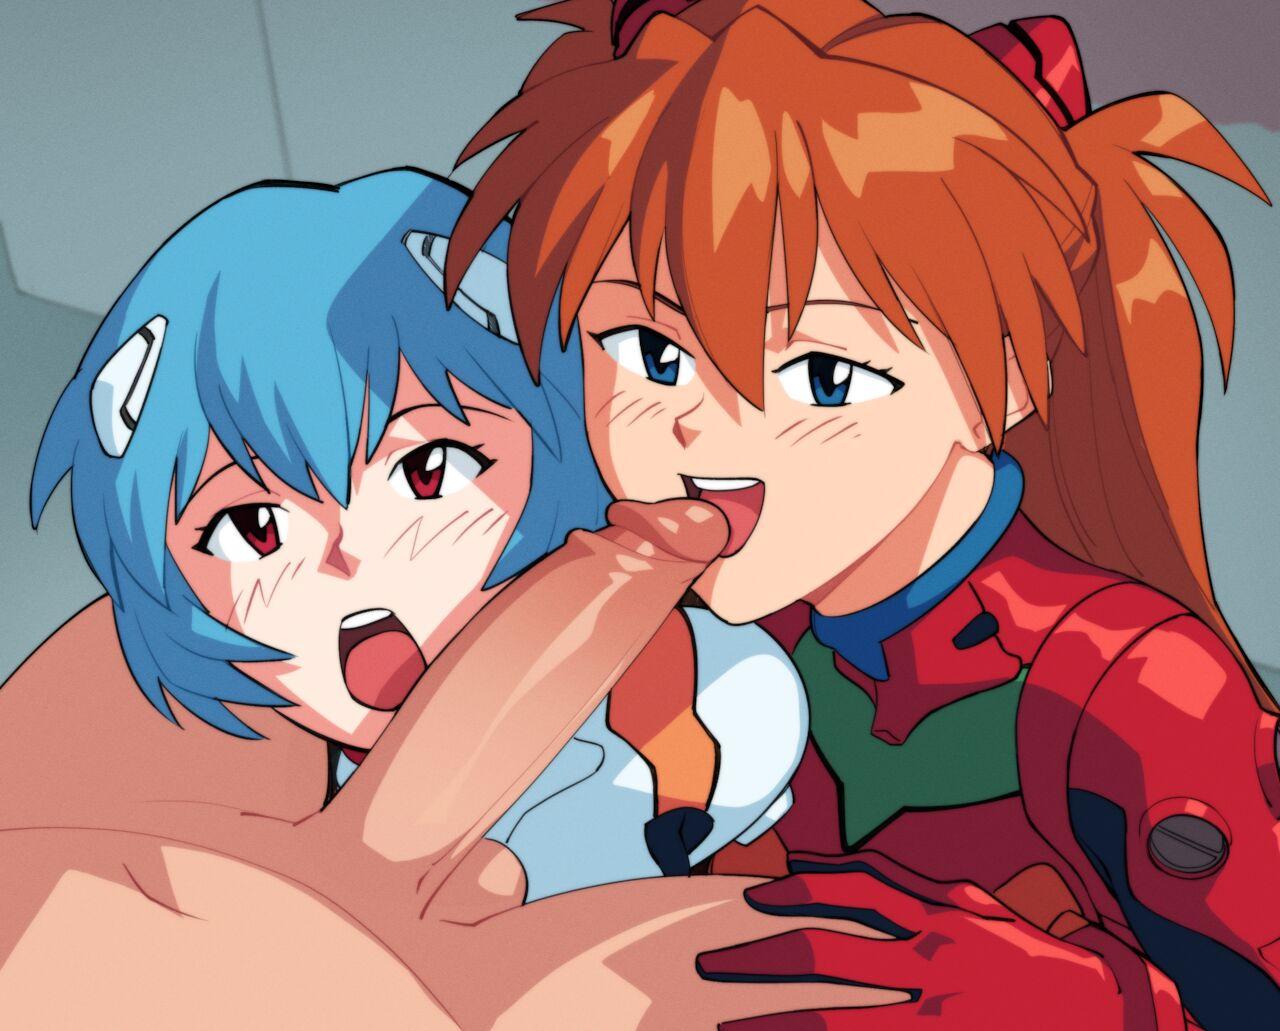 Hot Whores You Can (Not) Resist [+18] by suioresnuart - Neon genesis evangelion Assfingering - Page 3